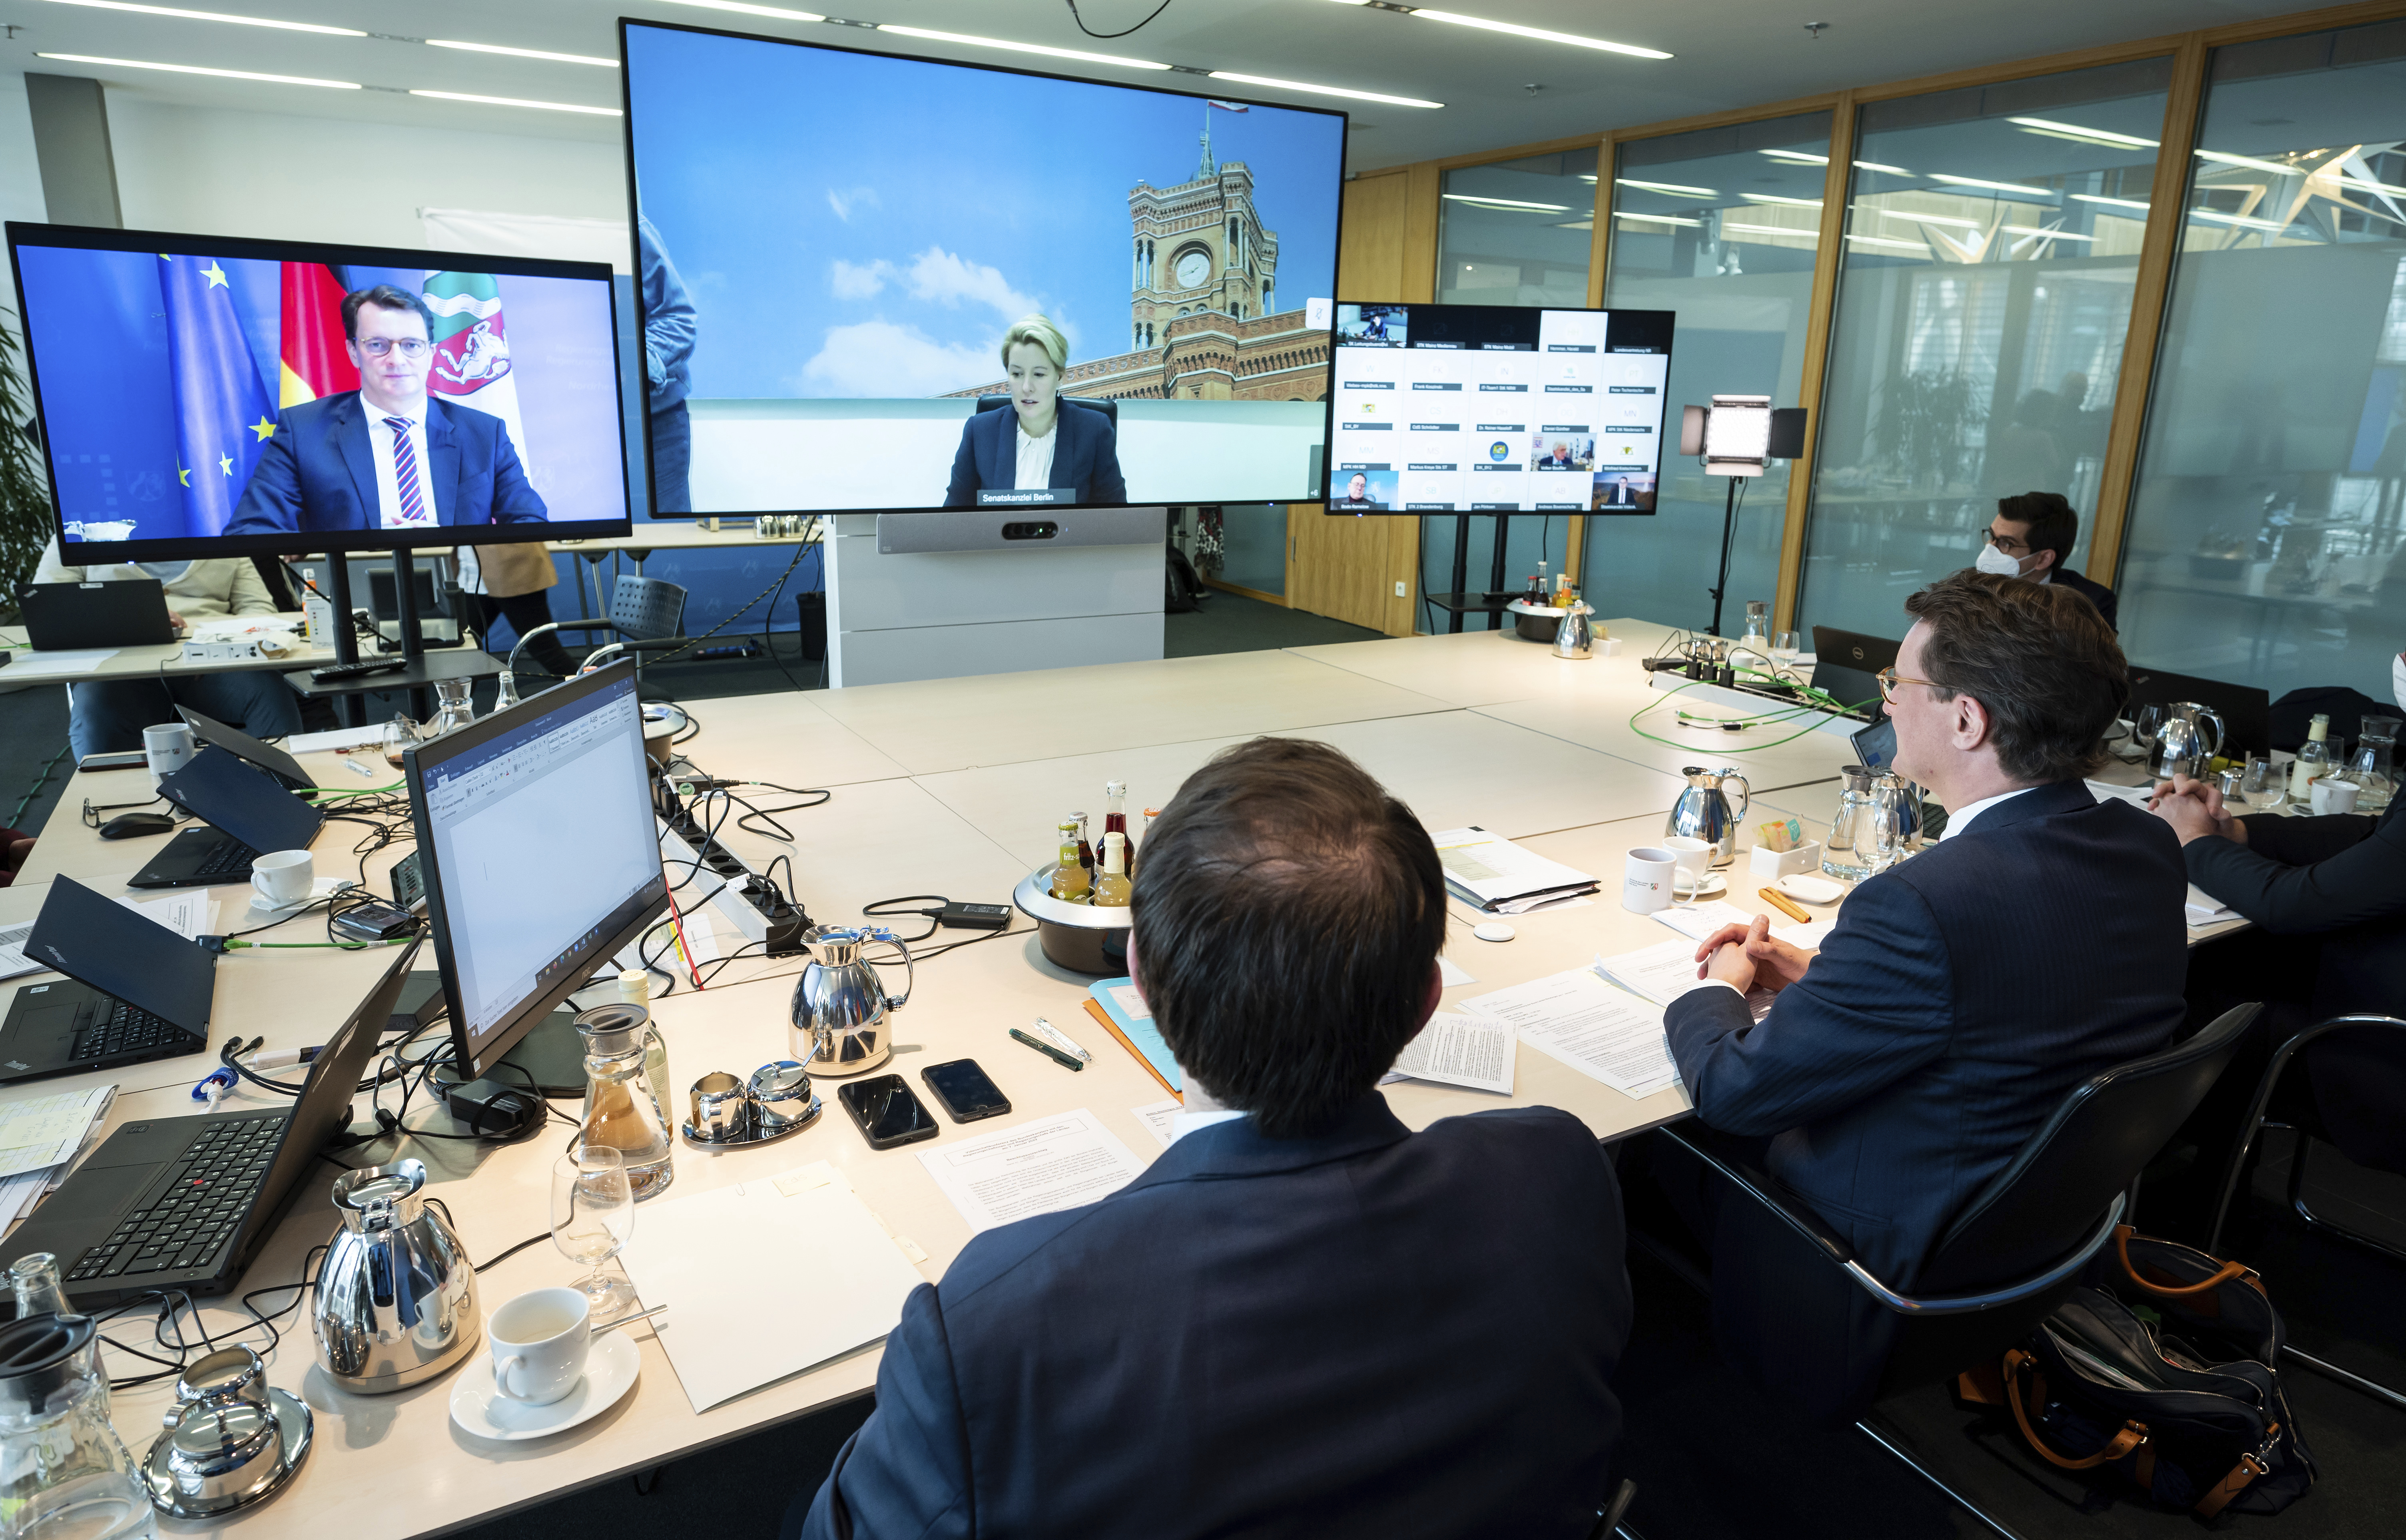 Hendrik W'st (CDU, r), Minister President of North Rhine-Westphalia and Chairman of the Conference of Minister Presidents (MPK), takes part in the video conference of the heads of government of the federal states in the representation of North Rhine-Westphalia in Berlin on 7 January 2022. Franziska Giffey (SPD), governing mayor of Berlin, is connected on the large screen. Following the MPK, the heads of state will discuss new Corona measures with the German government to contain the spread of the Omikron wave. 